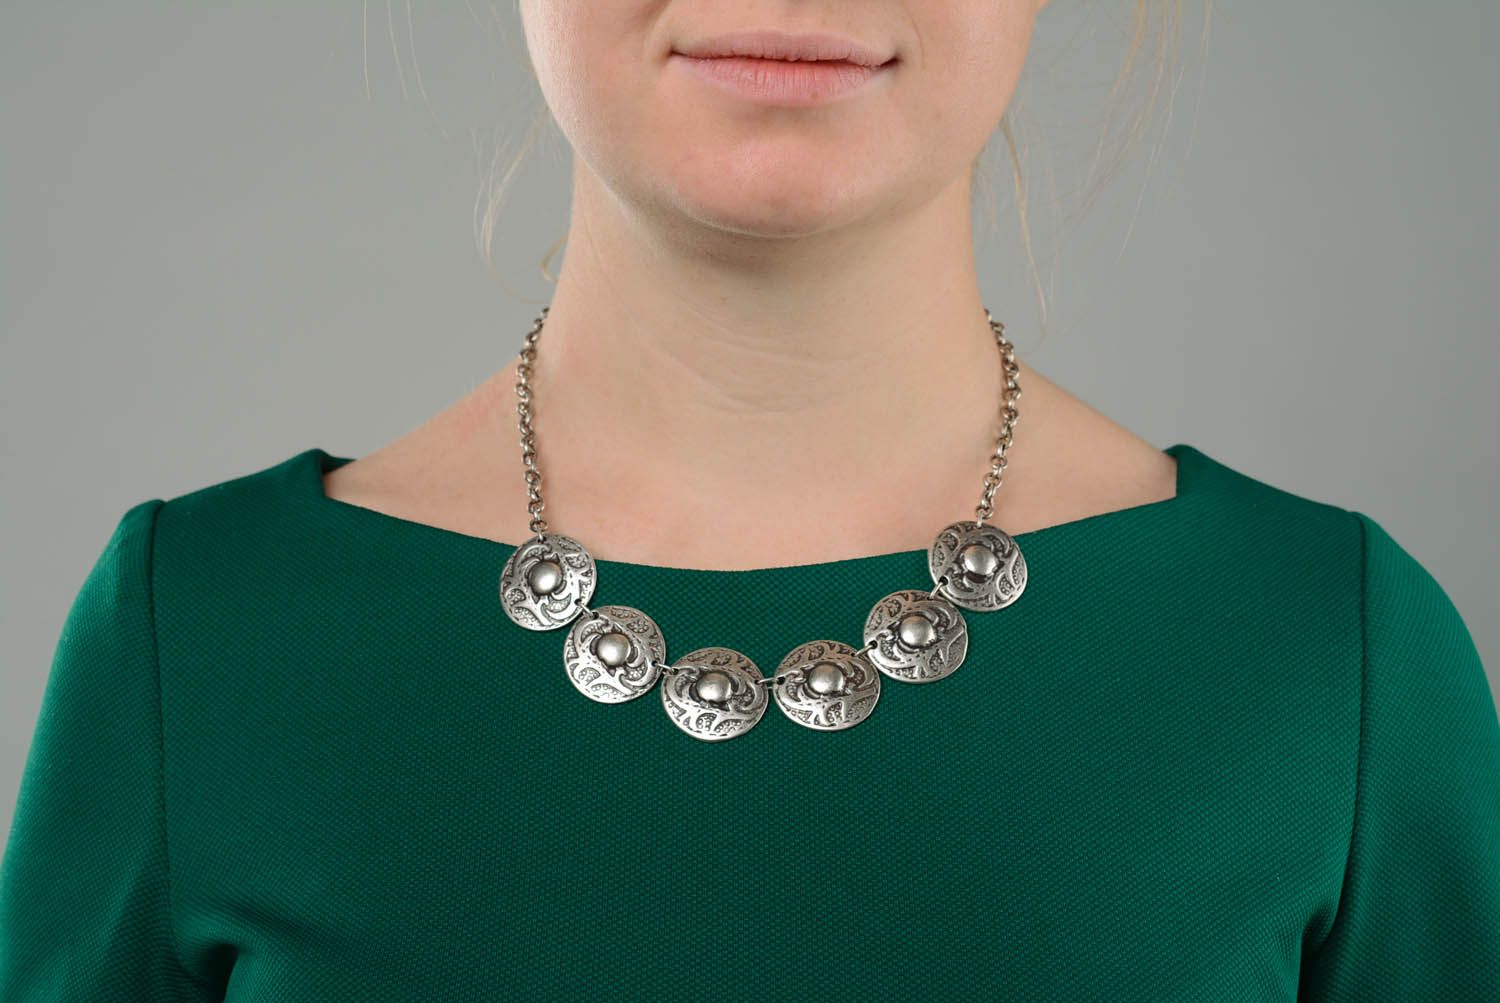 Necklace made of metal alloy photo 5